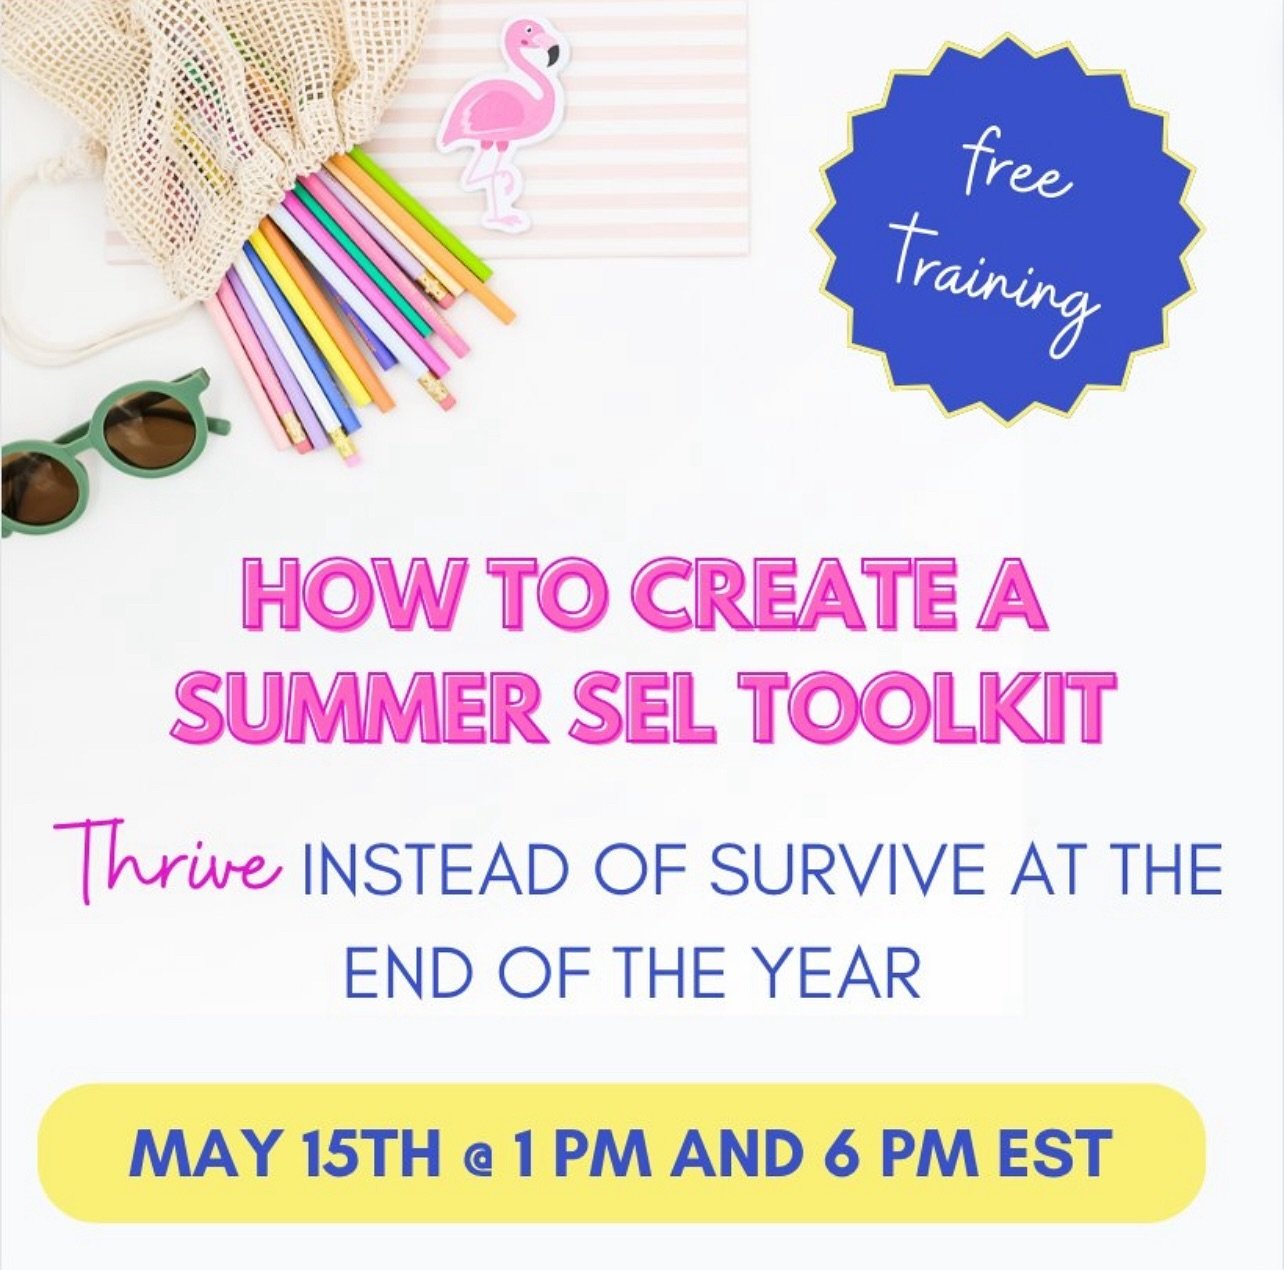 🚨Have you heard the news?? 🚨

It&rsquo;s time to THRIVE instead of survive to close out this year! 

Look, I know You want to support your students&rsquo; social-emotional well-being over the summer, but you have too much on your plate at the end o